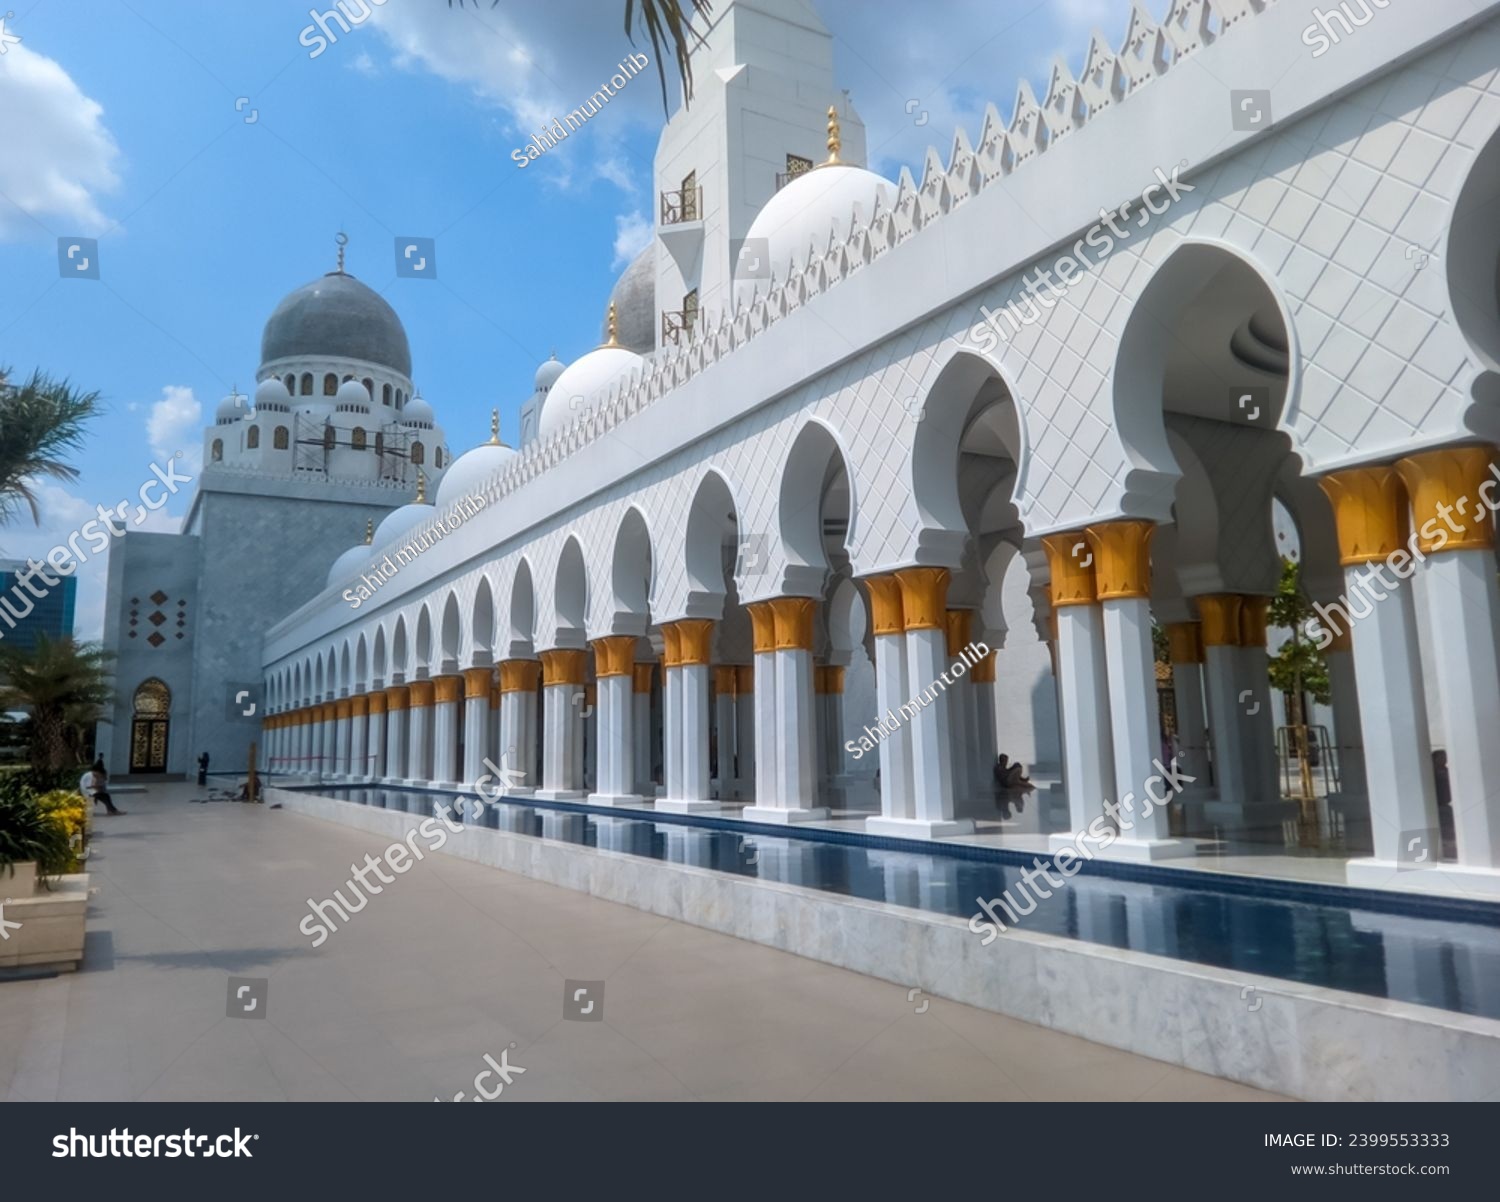 The splendor of the Syech Zayed Mosque building in the city of Surakarta, Central Java, is elegant and you can see some leaves from the trees around it and the bright blue sky and white clouds  #2399553333